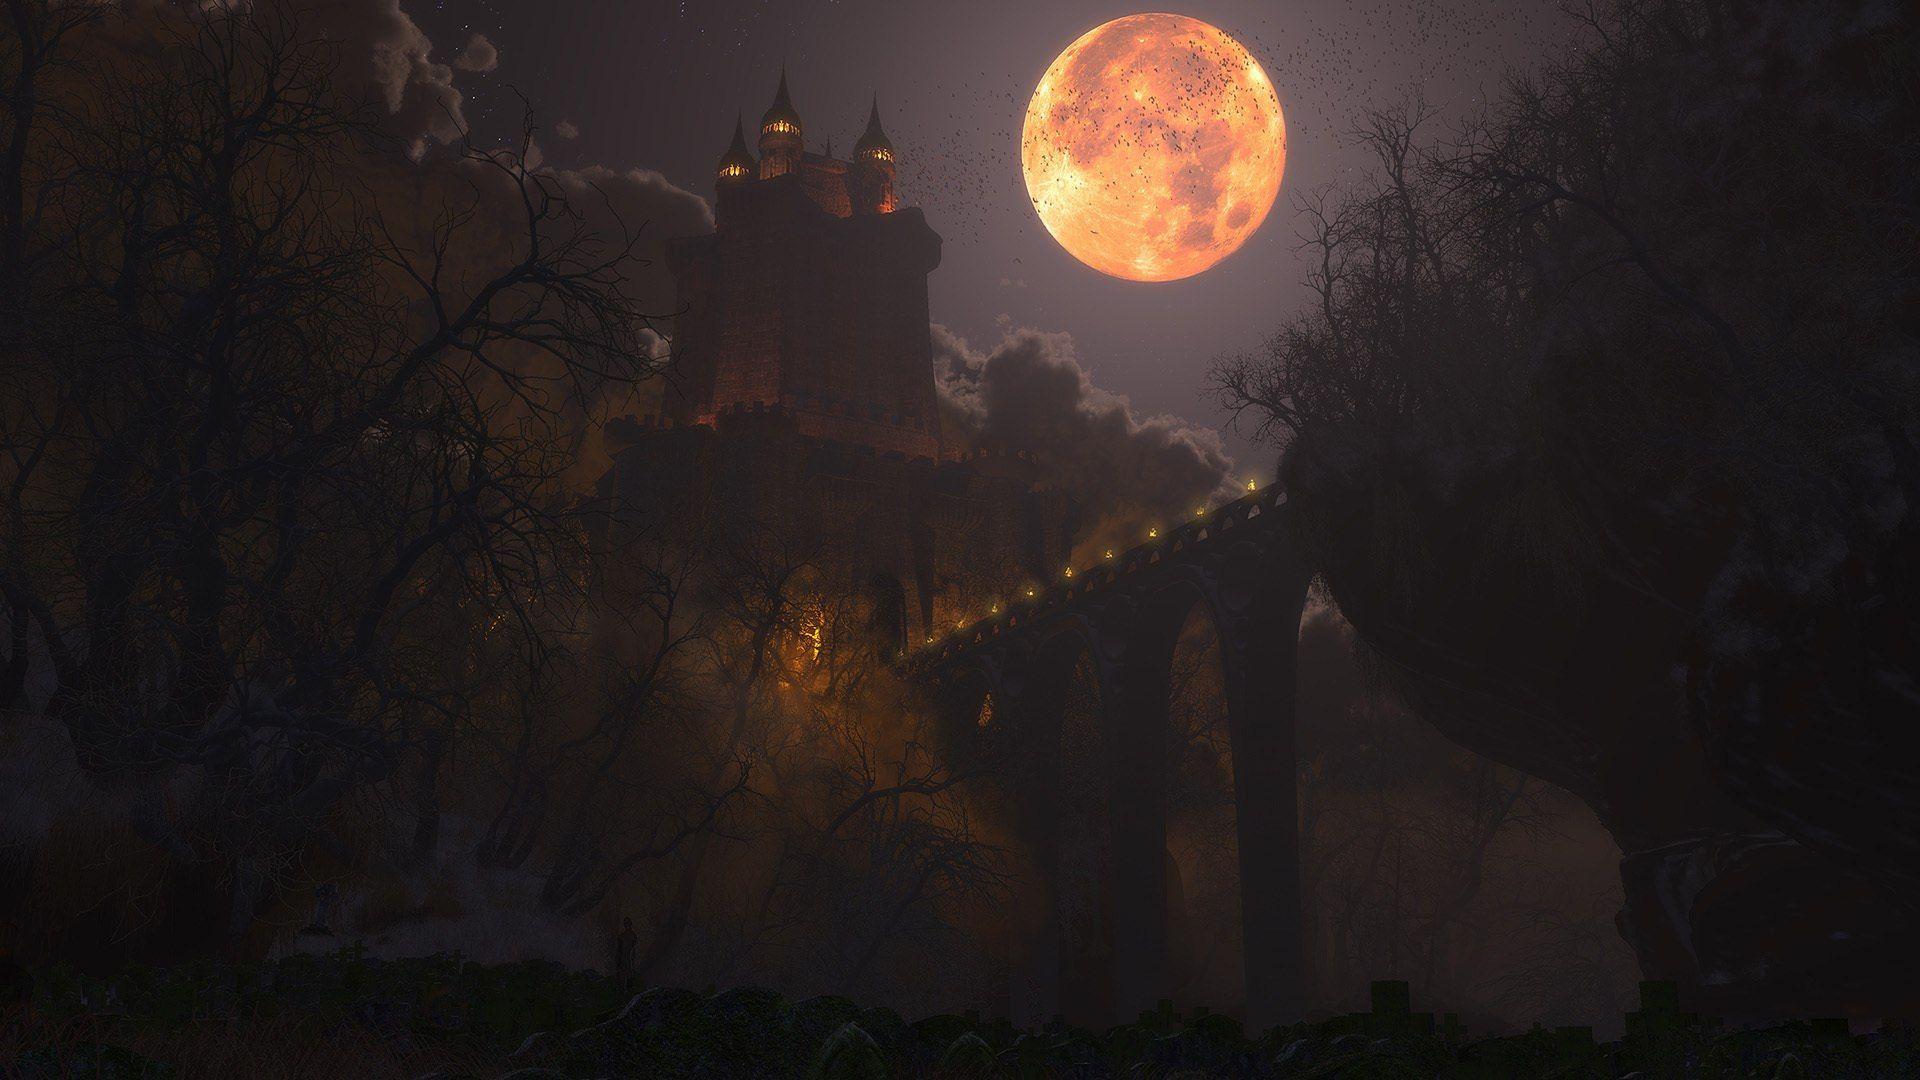 Moon over the castle of Dracula wallpaper and image